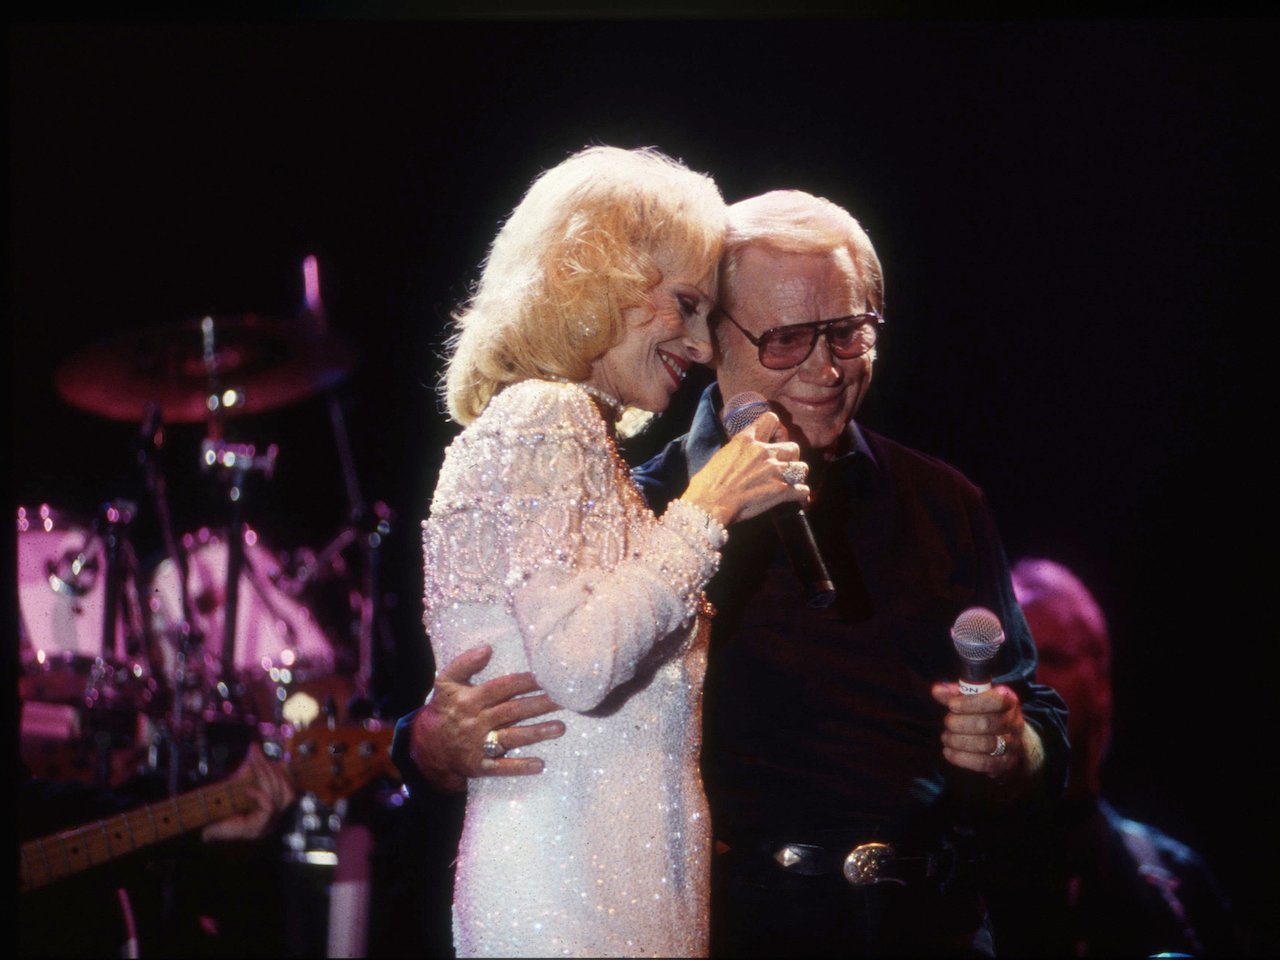 Tammy Wynette and George Jones, pictured embracing during a performance, had a hard time because of his drinking